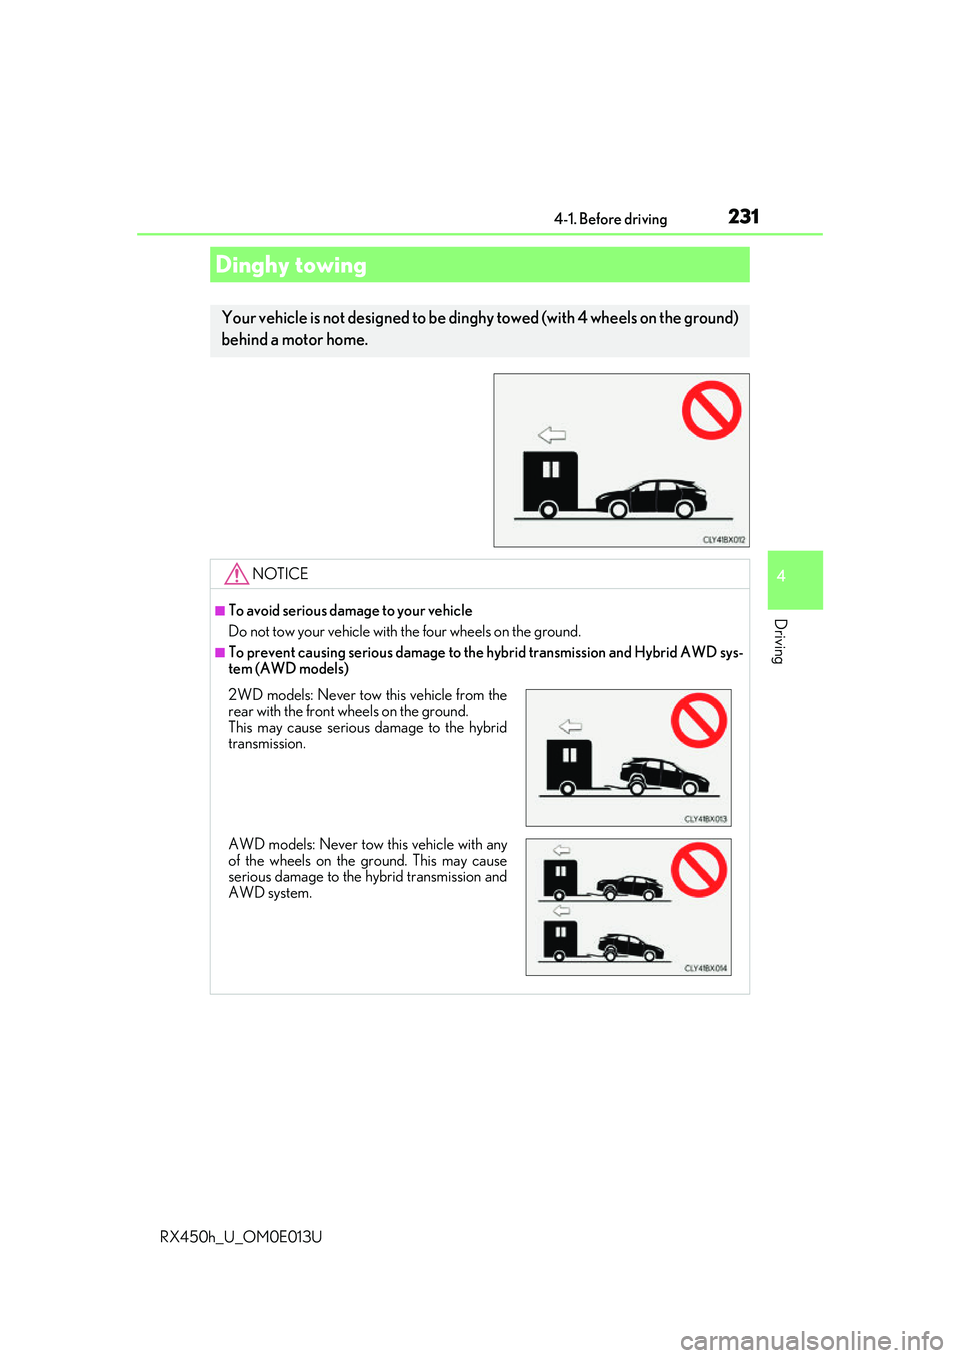 LEXUS RX450H 2016  Owners Manual 2314-1. Before driving
4
Driving
RX450h_U_OM0E013U
Dinghy towing
Your vehicle is not designed to be dinghy towed (with 4 wheels on the ground)
behind a motor home. 
NOTICE
■To avoid serious damage t